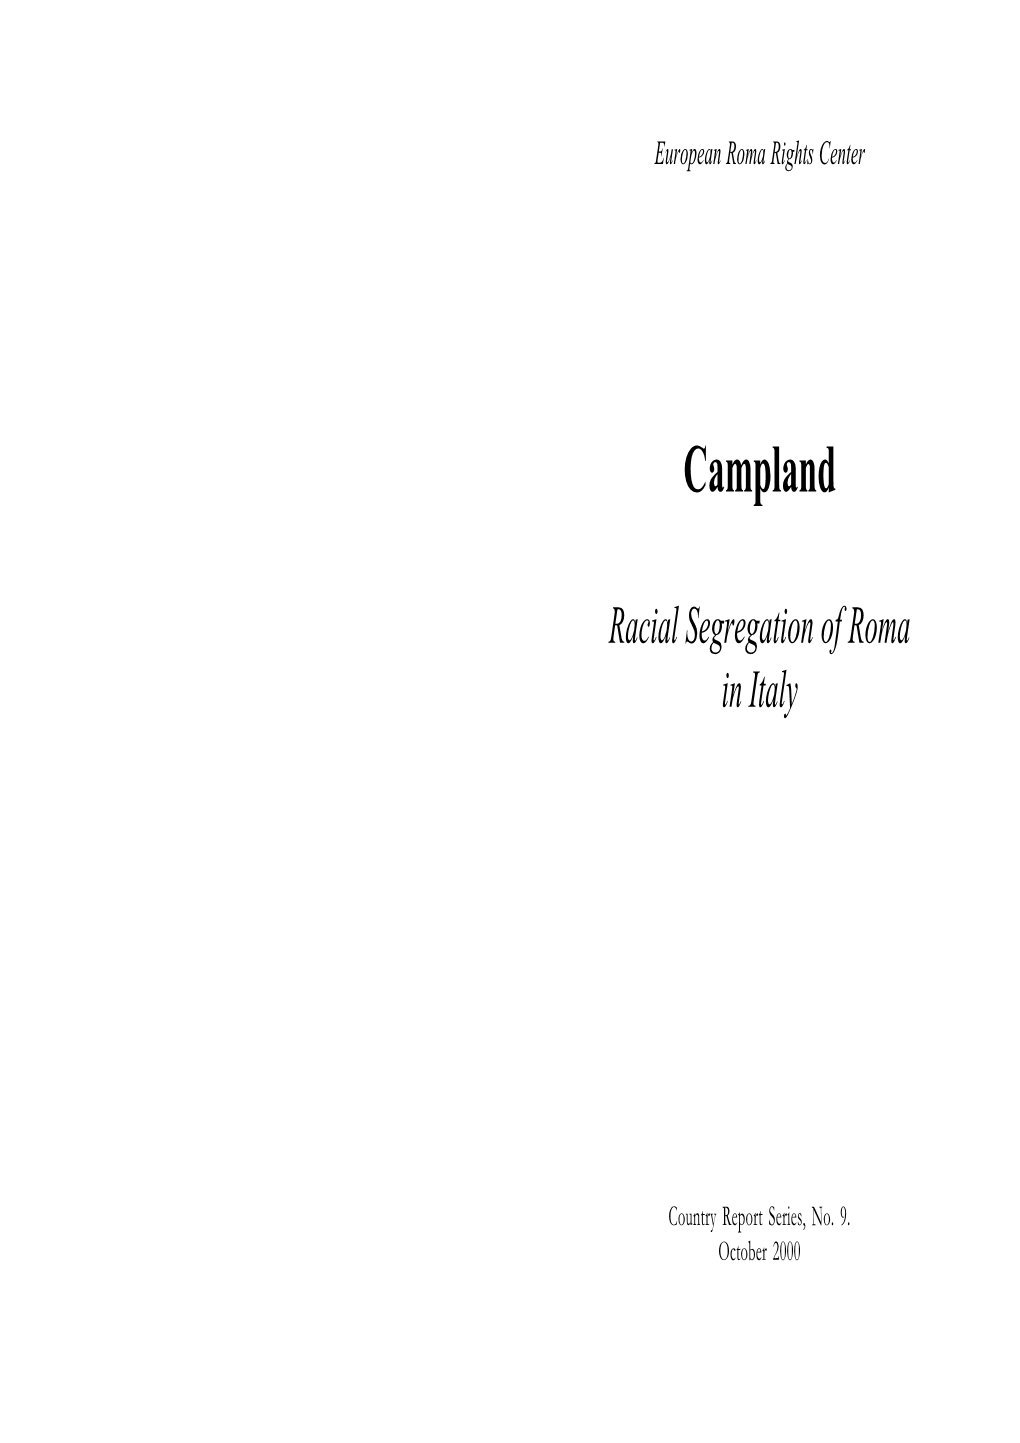 Campland: Racial Segregation of Roma in Italy